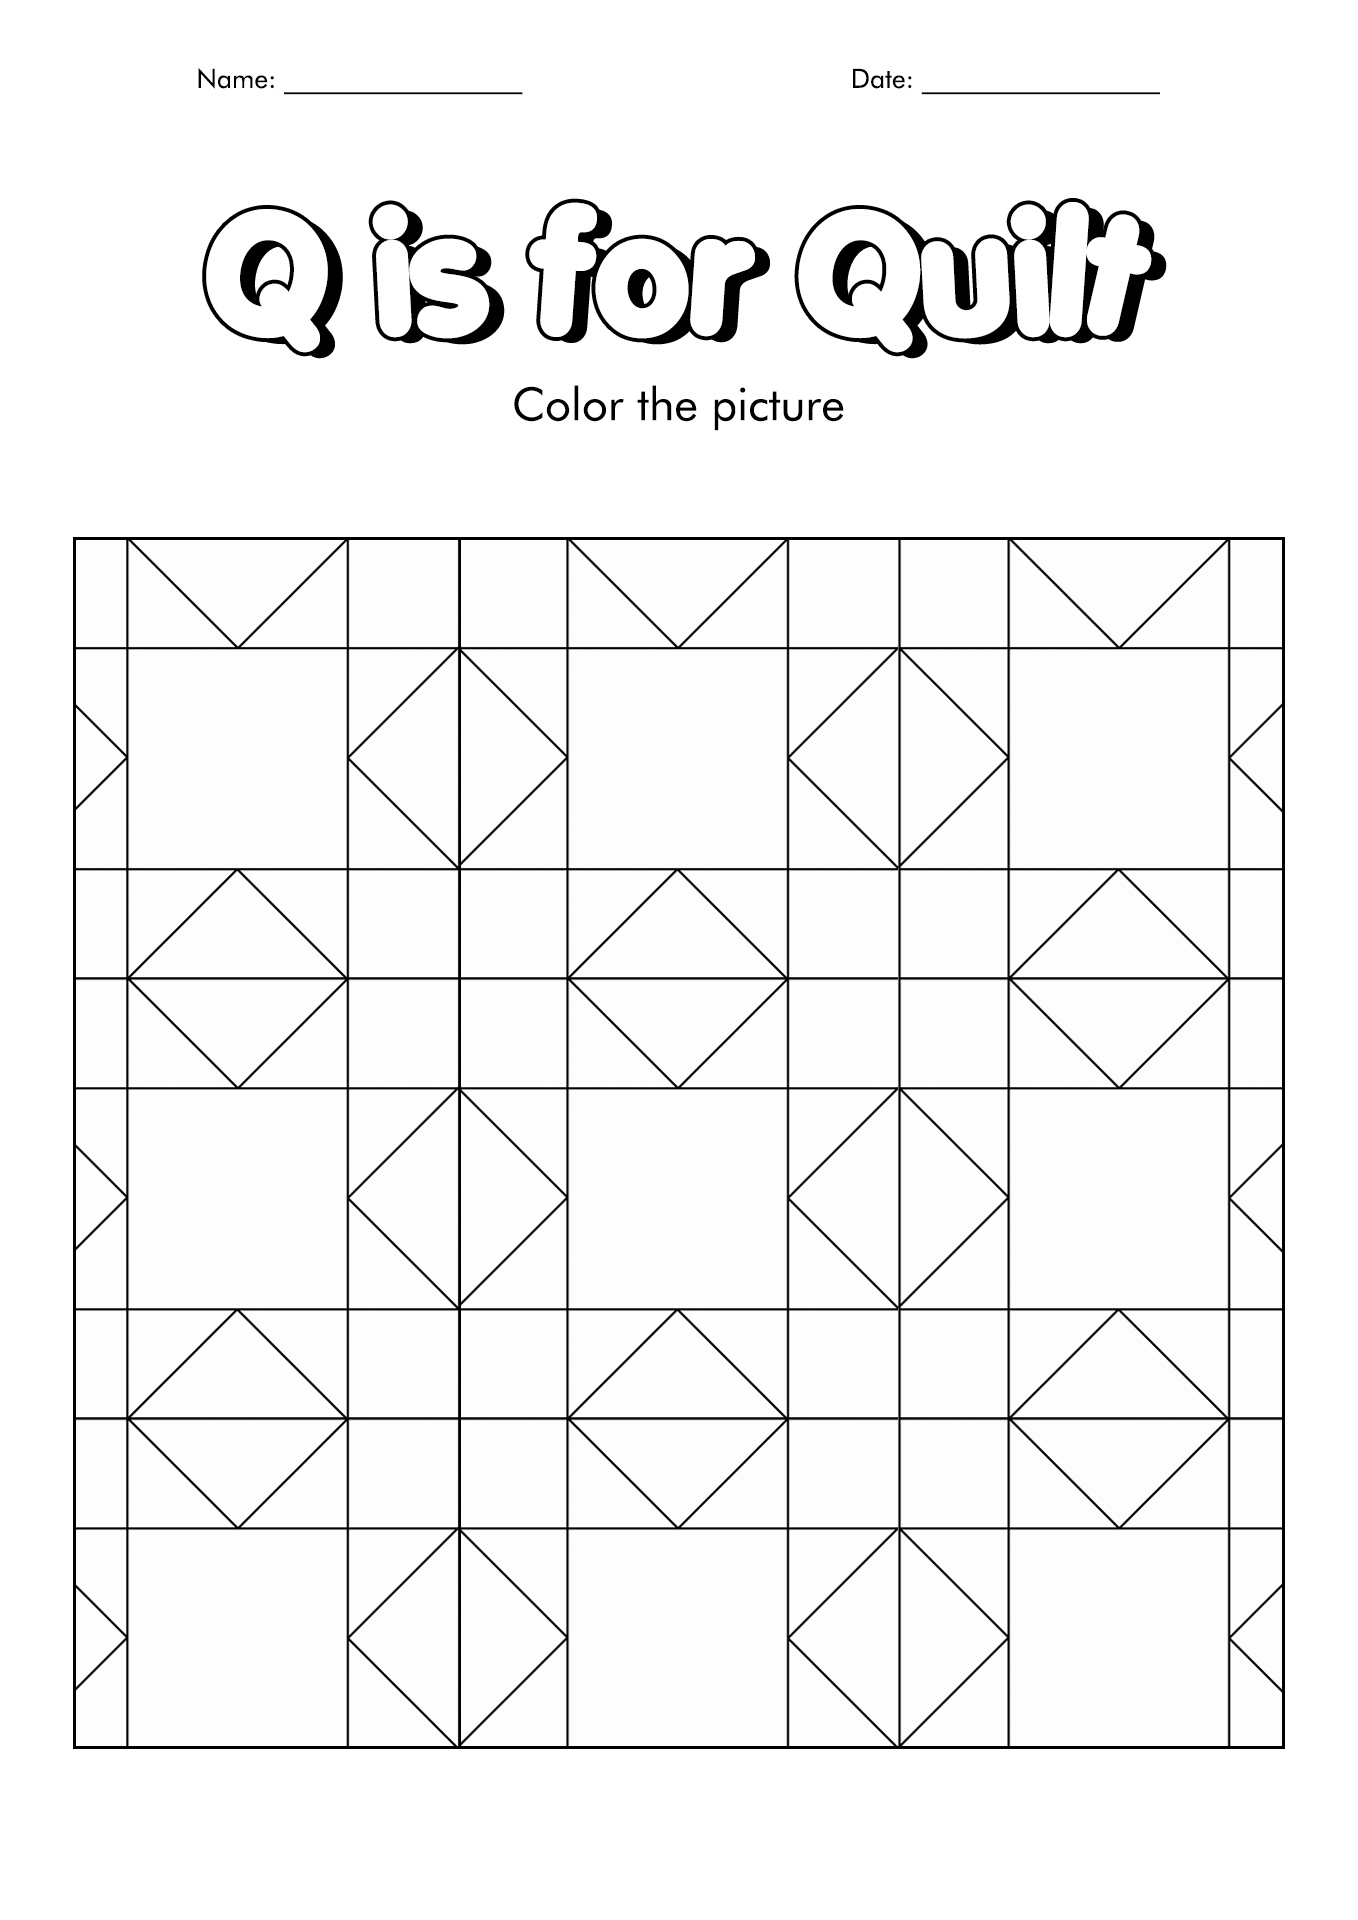 13 Best Images of Blank Quilt Worksheet - Blank Quilt Square Template